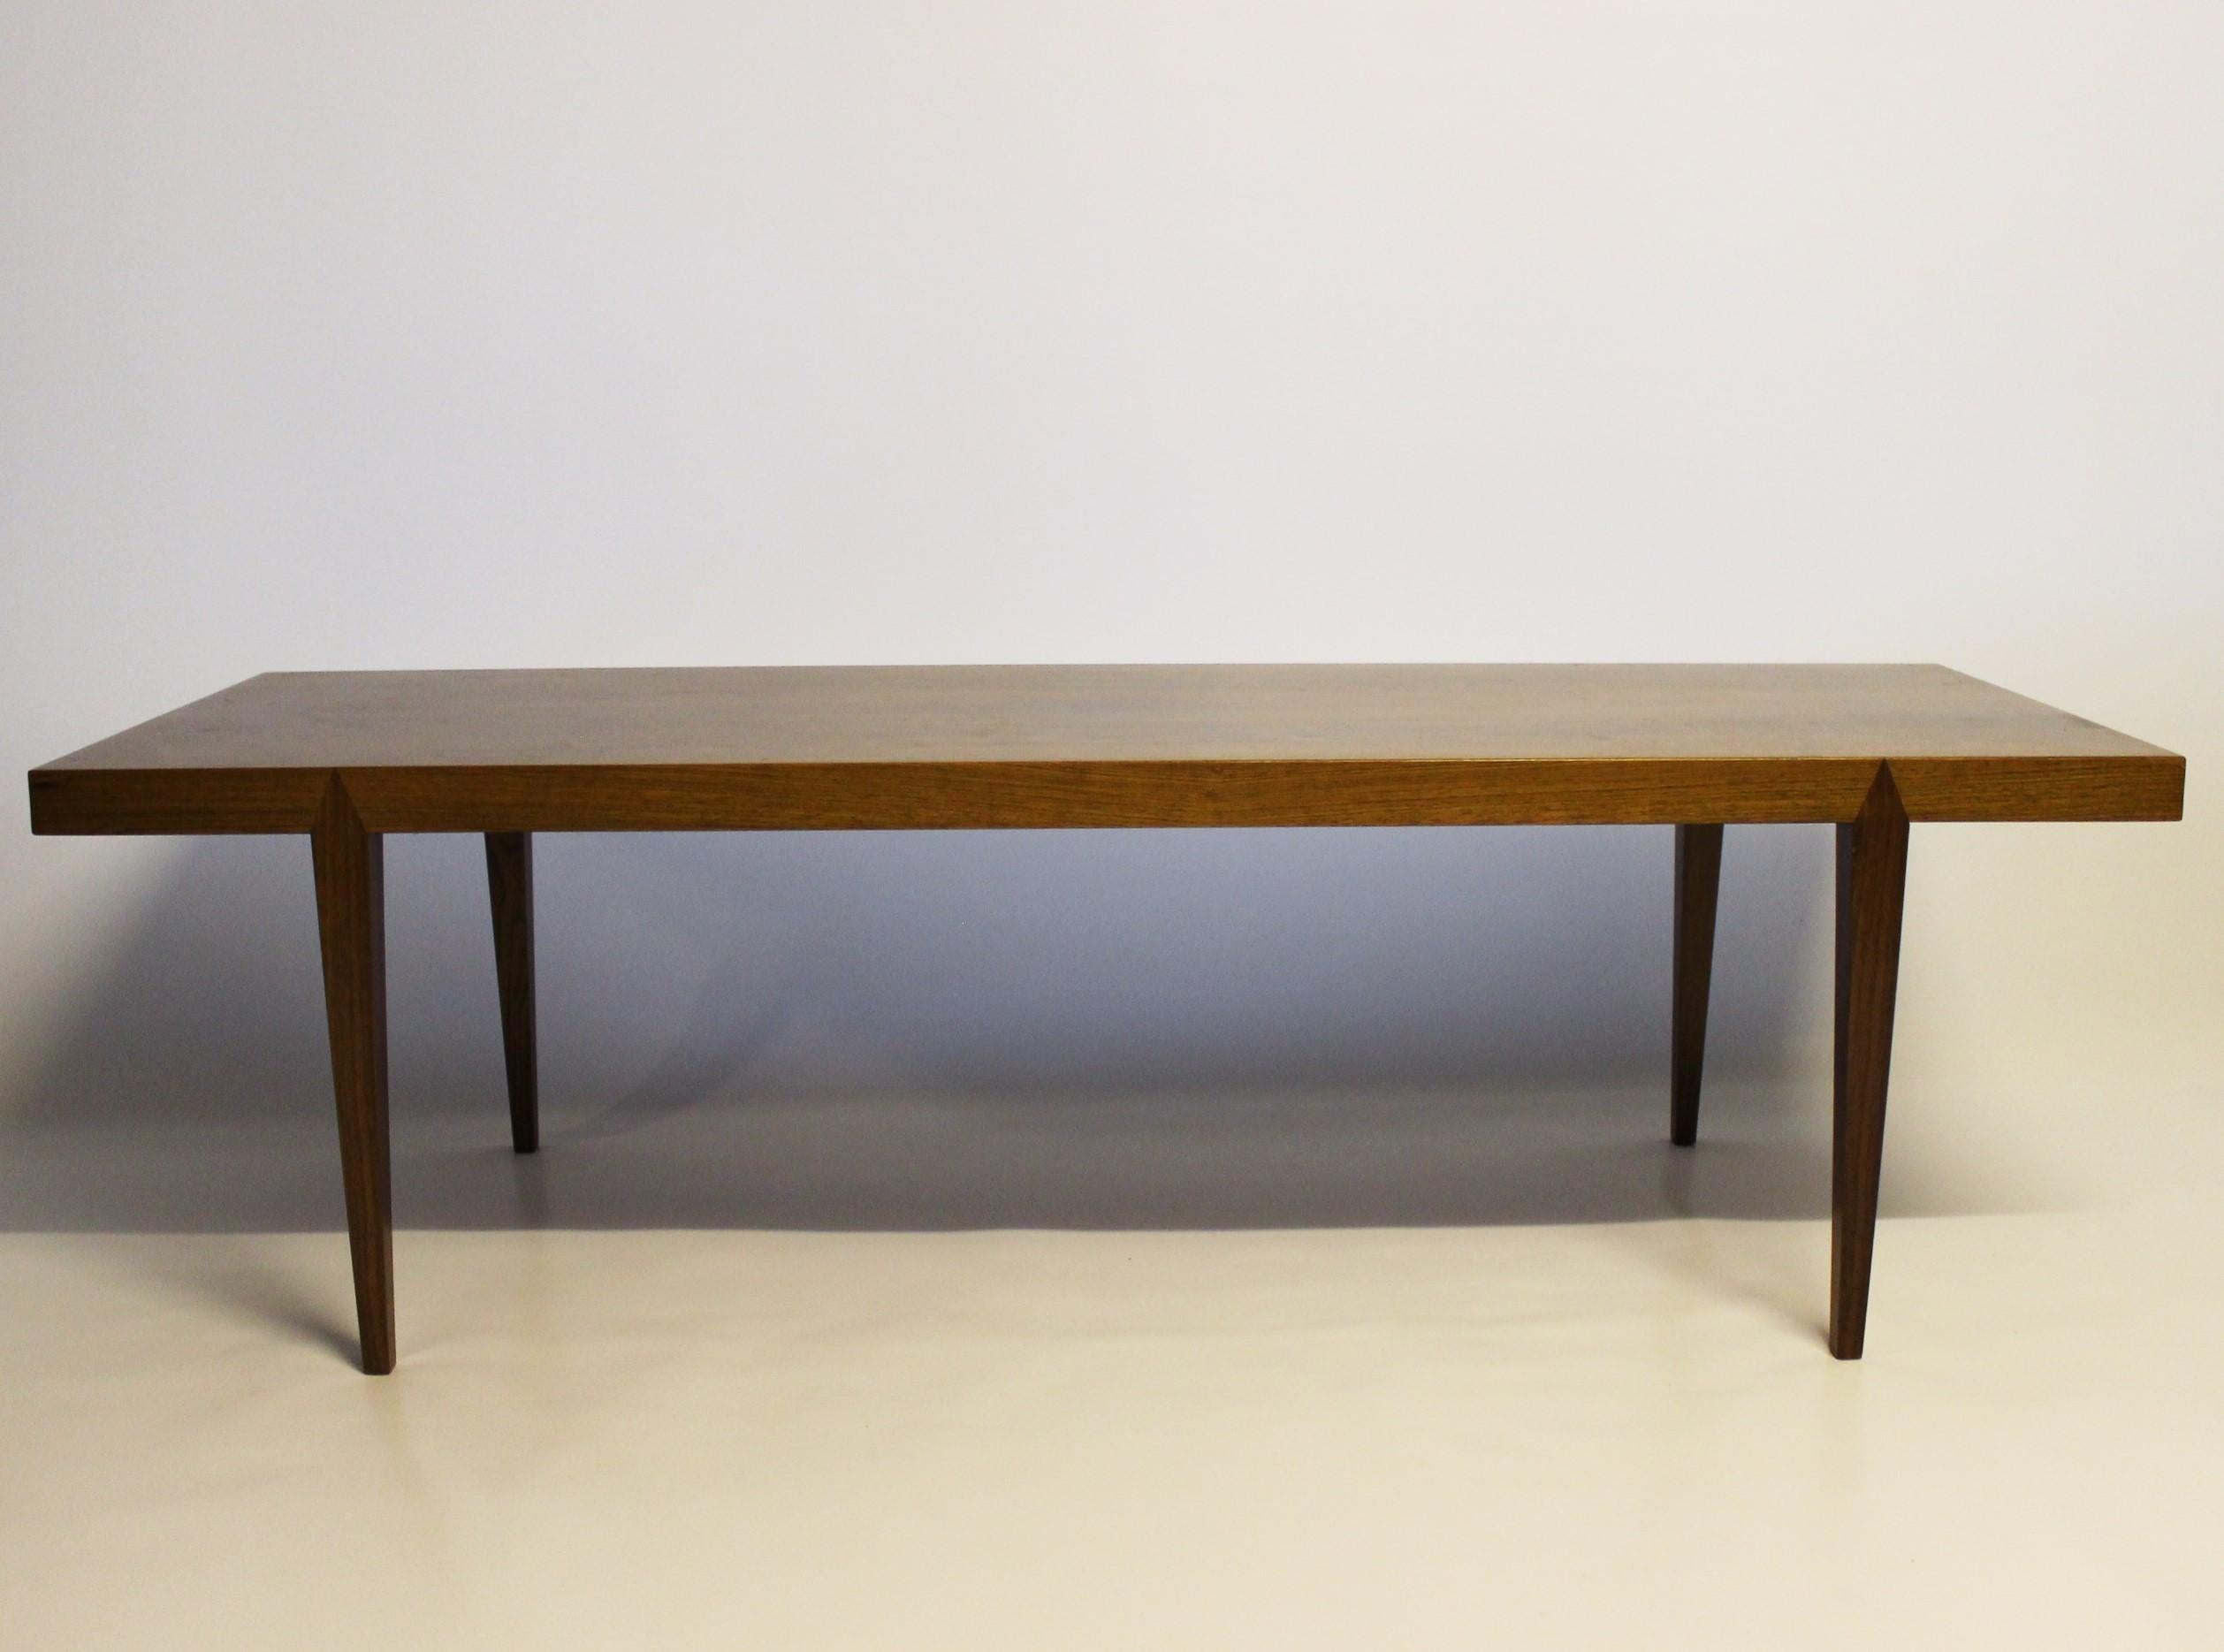 Coffee table of rosewood designed by Severin Hansen and manufactured by Haslev in the 1960s. The table is in great vintage condition.